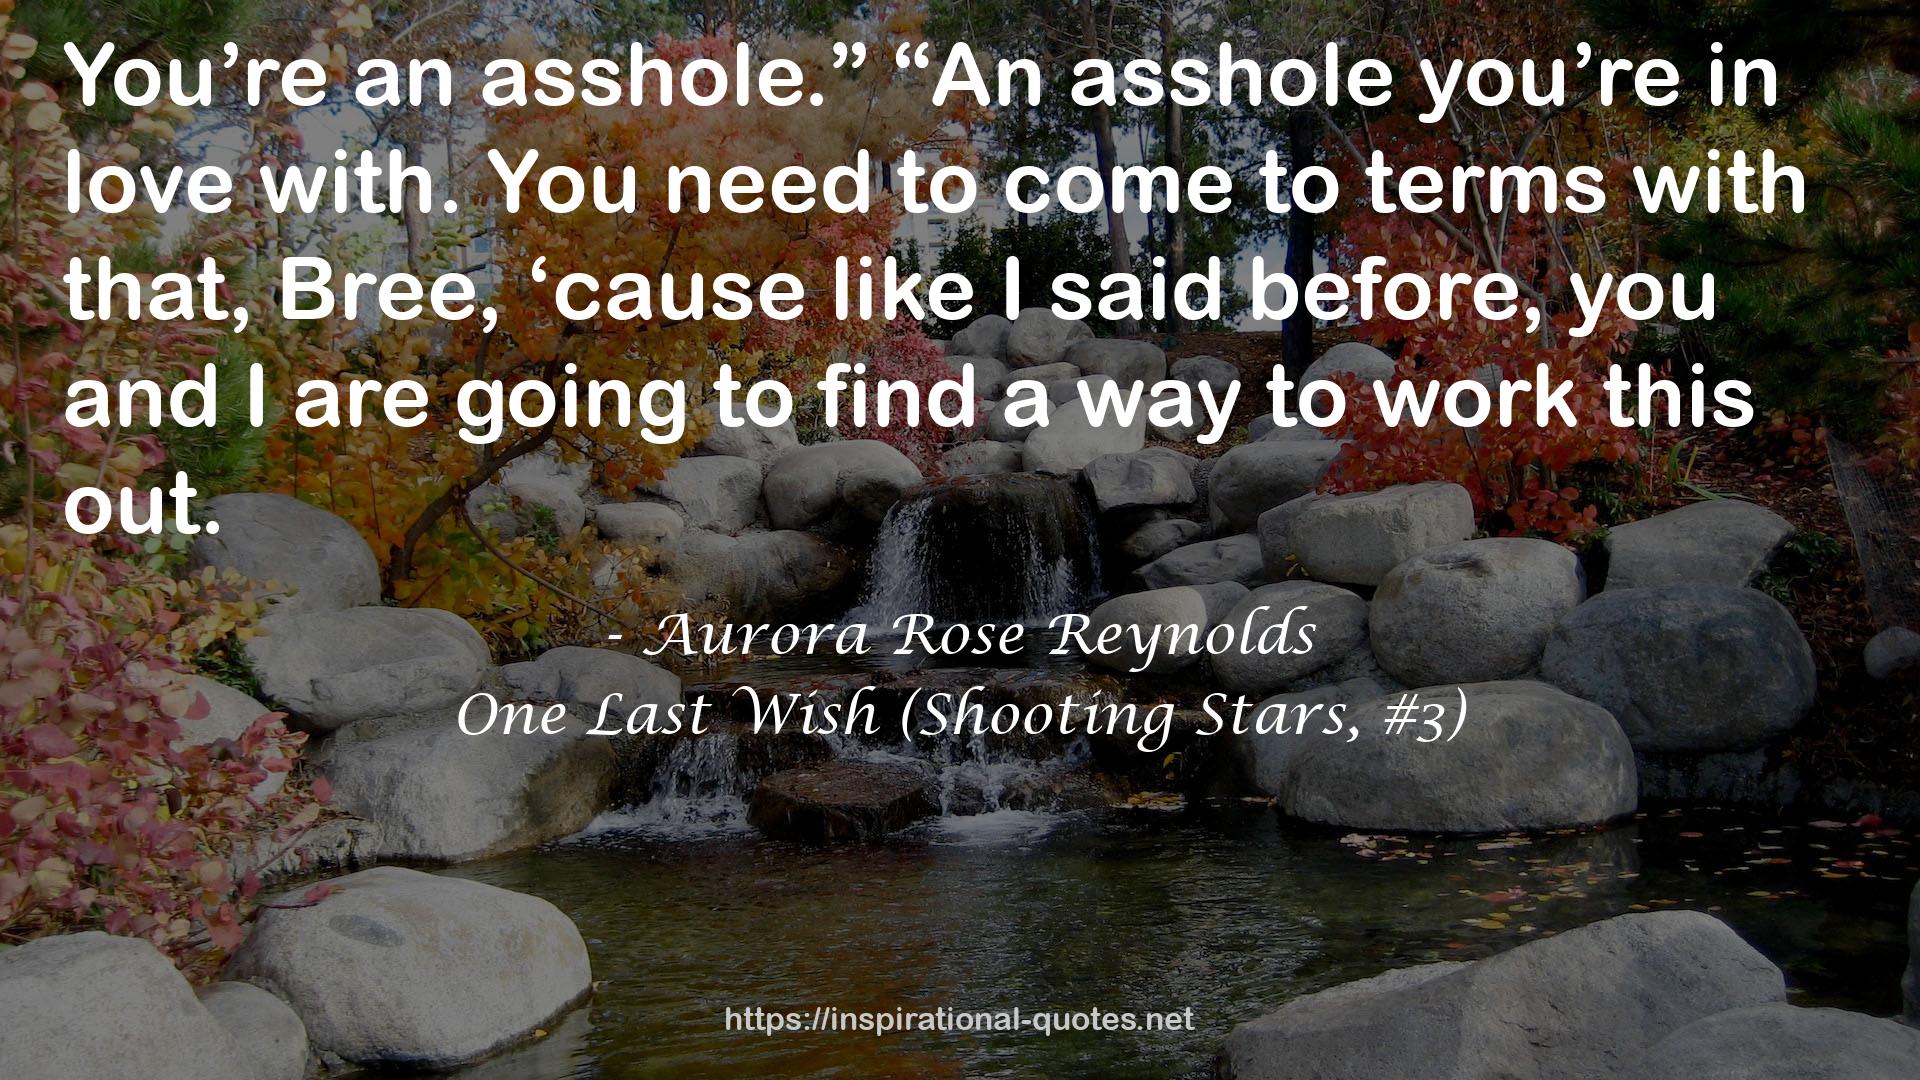 One Last Wish (Shooting Stars, #3) QUOTES